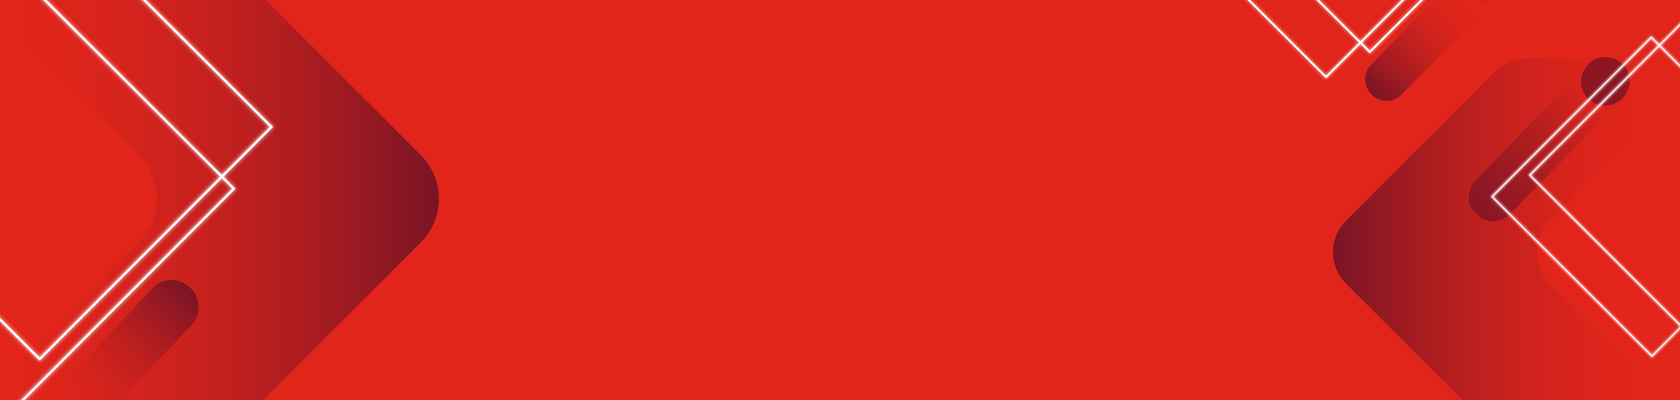 Red_Geometric_Homepage_Banner_Background.png